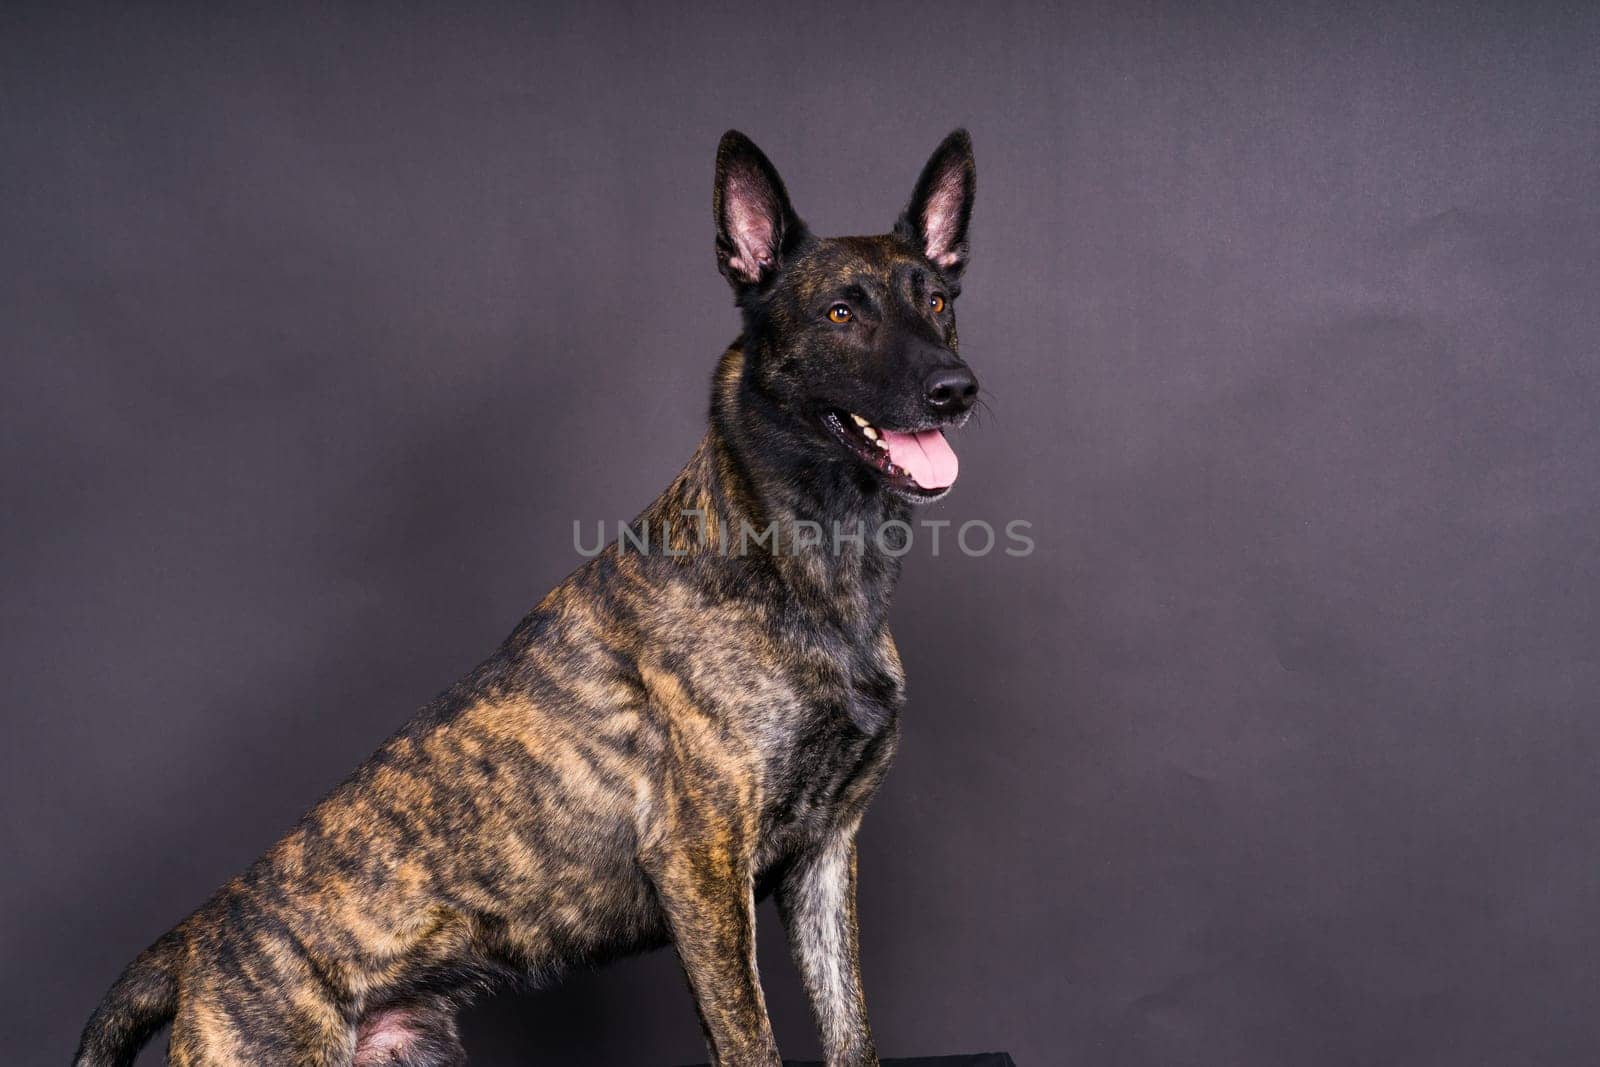 Studio shot of an adorable mixed breed dog sitting on a black background.